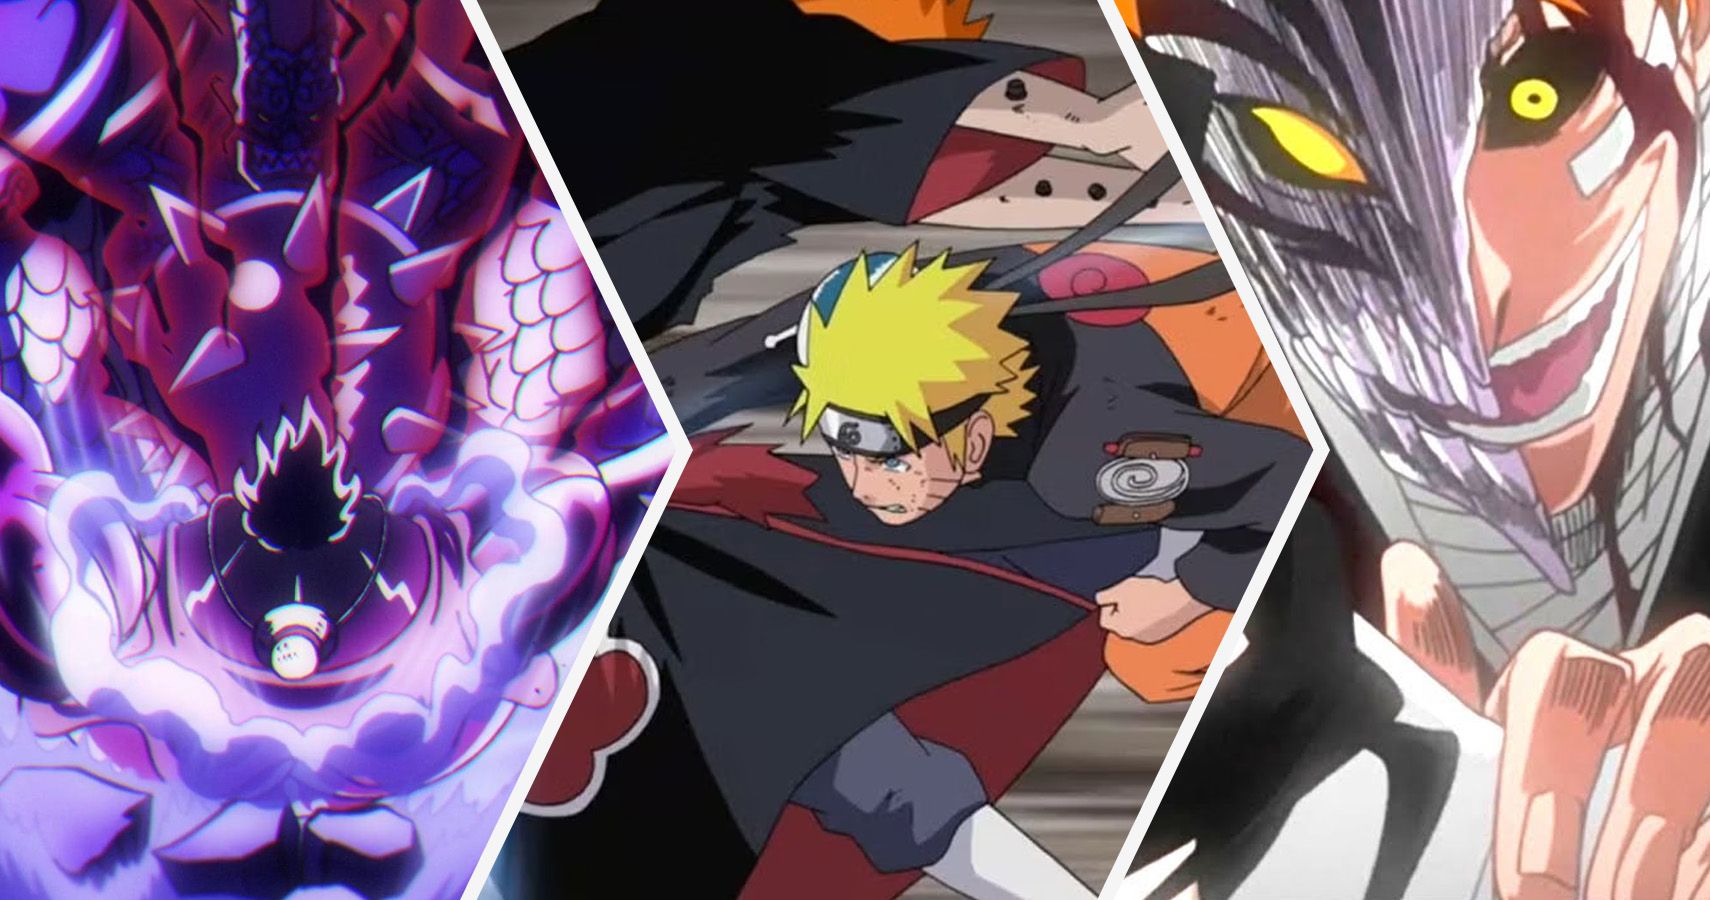 A split image of iconic fights from one piece naruto and bleach